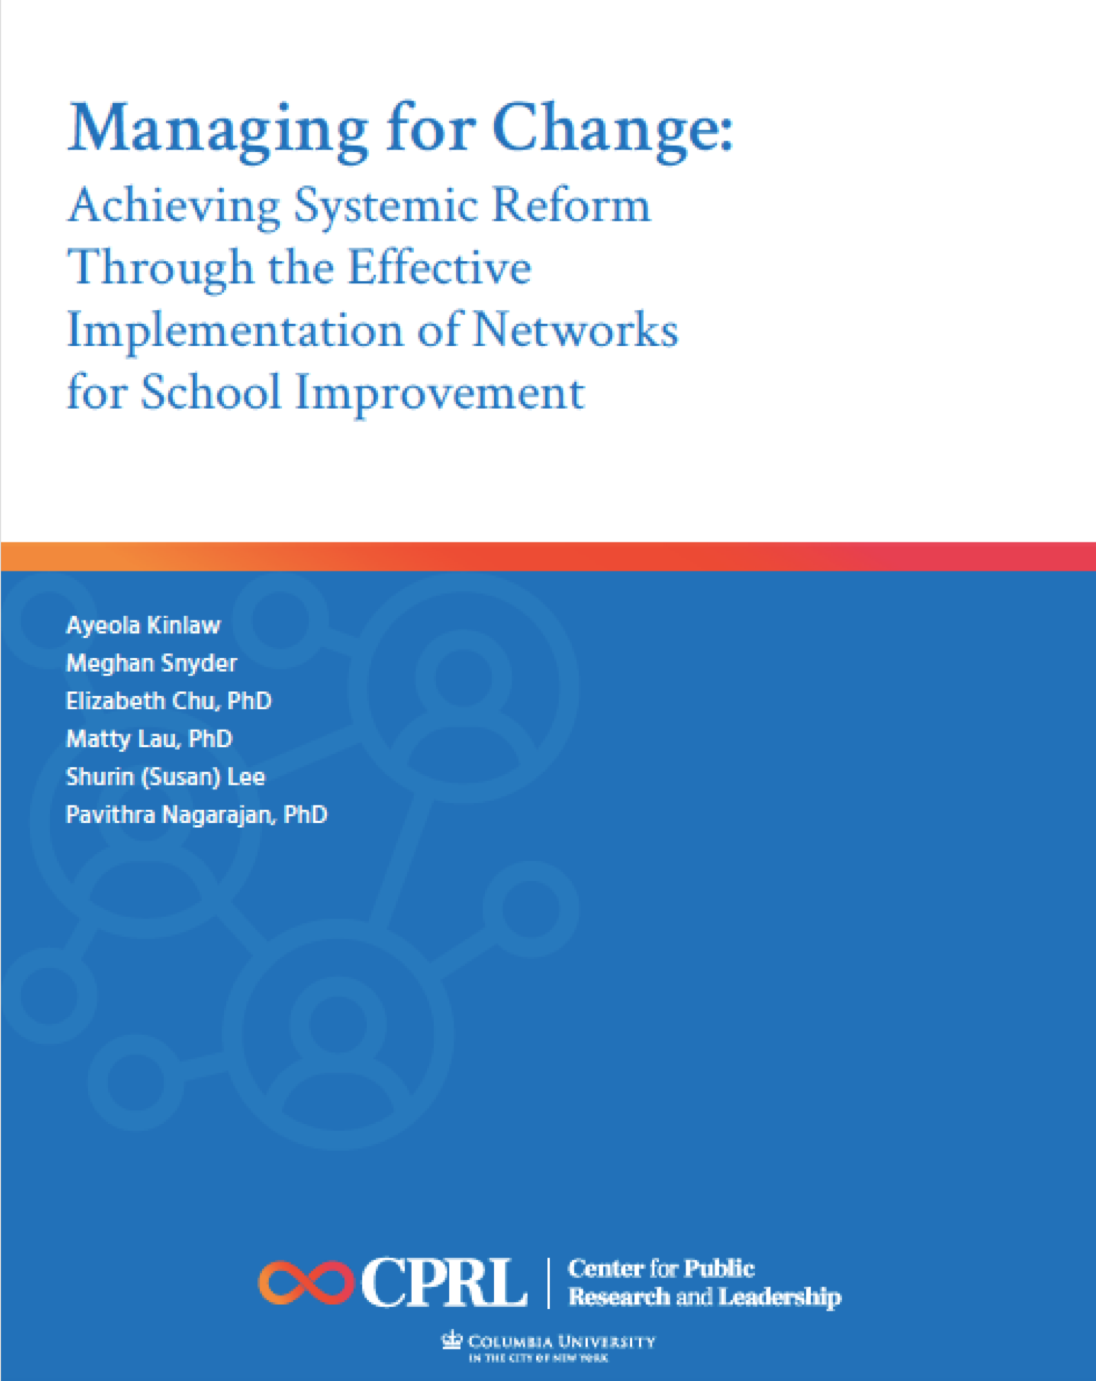 cover of managing for change report. 